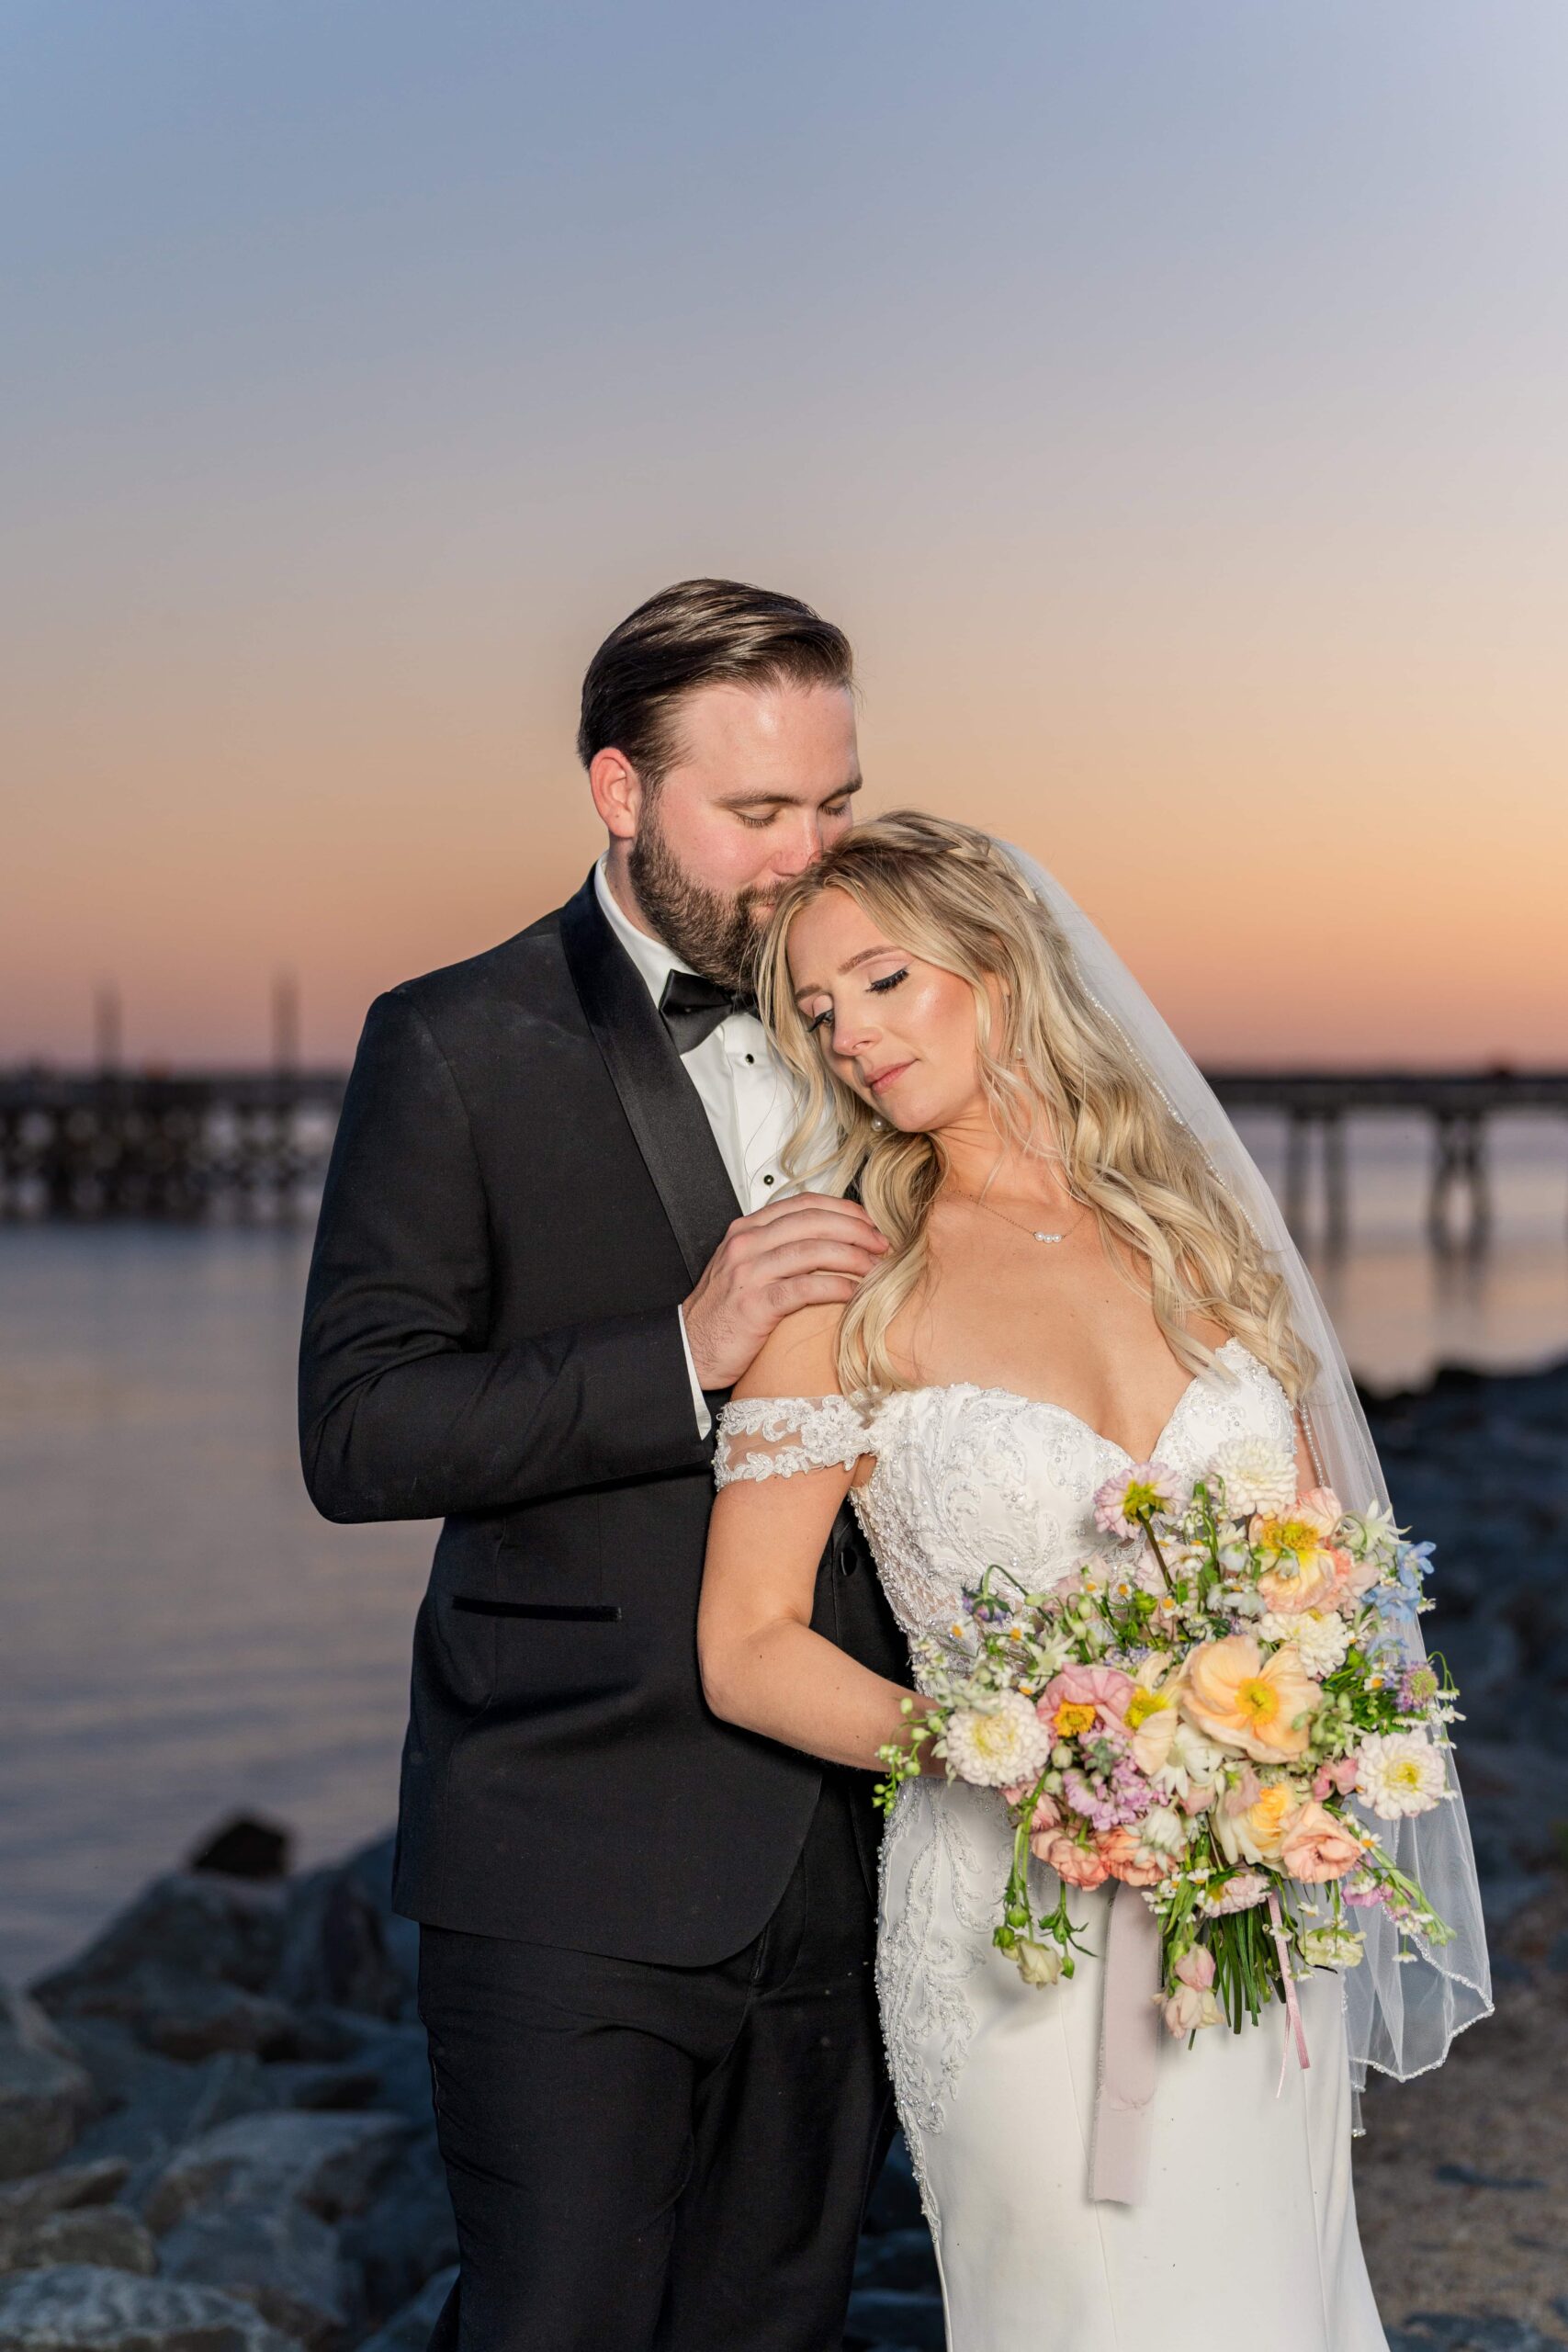 The bride and groom snuggle up together at the beach at sunset. The pier is visible off in the distance and the orange sunset reflects off of the ocean waves.